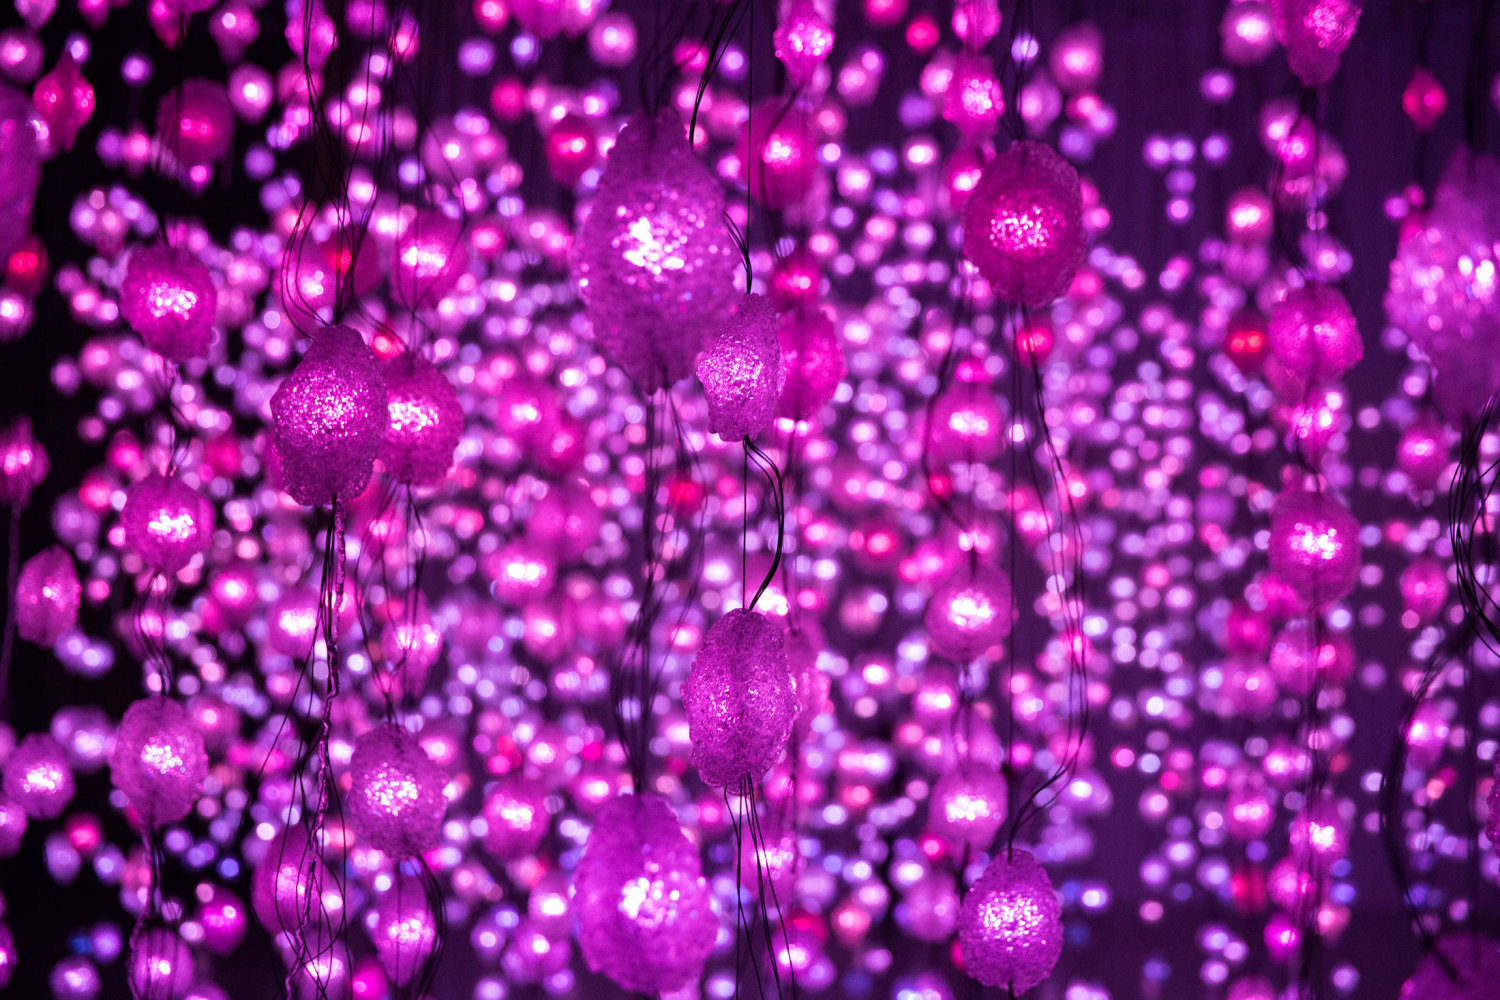 Pipilotti Rist
Pixelwald (Pixel Forest), 2016
Hanging LED light installation and media player
Duration: 35 minutes
Dimensions variable
Installation view,&amp;nbsp;MFA Houston, 2017
Photo: The Storyhive&amp;nbsp;